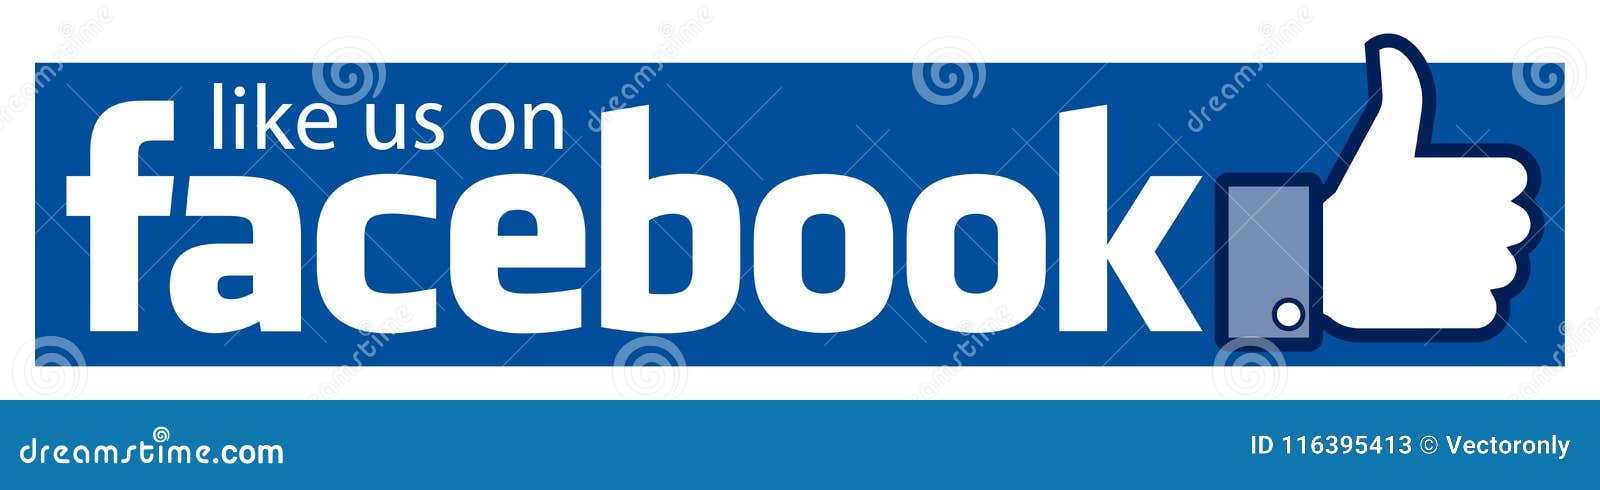 Like Us On Facebook Banner Editorial Stock Photo